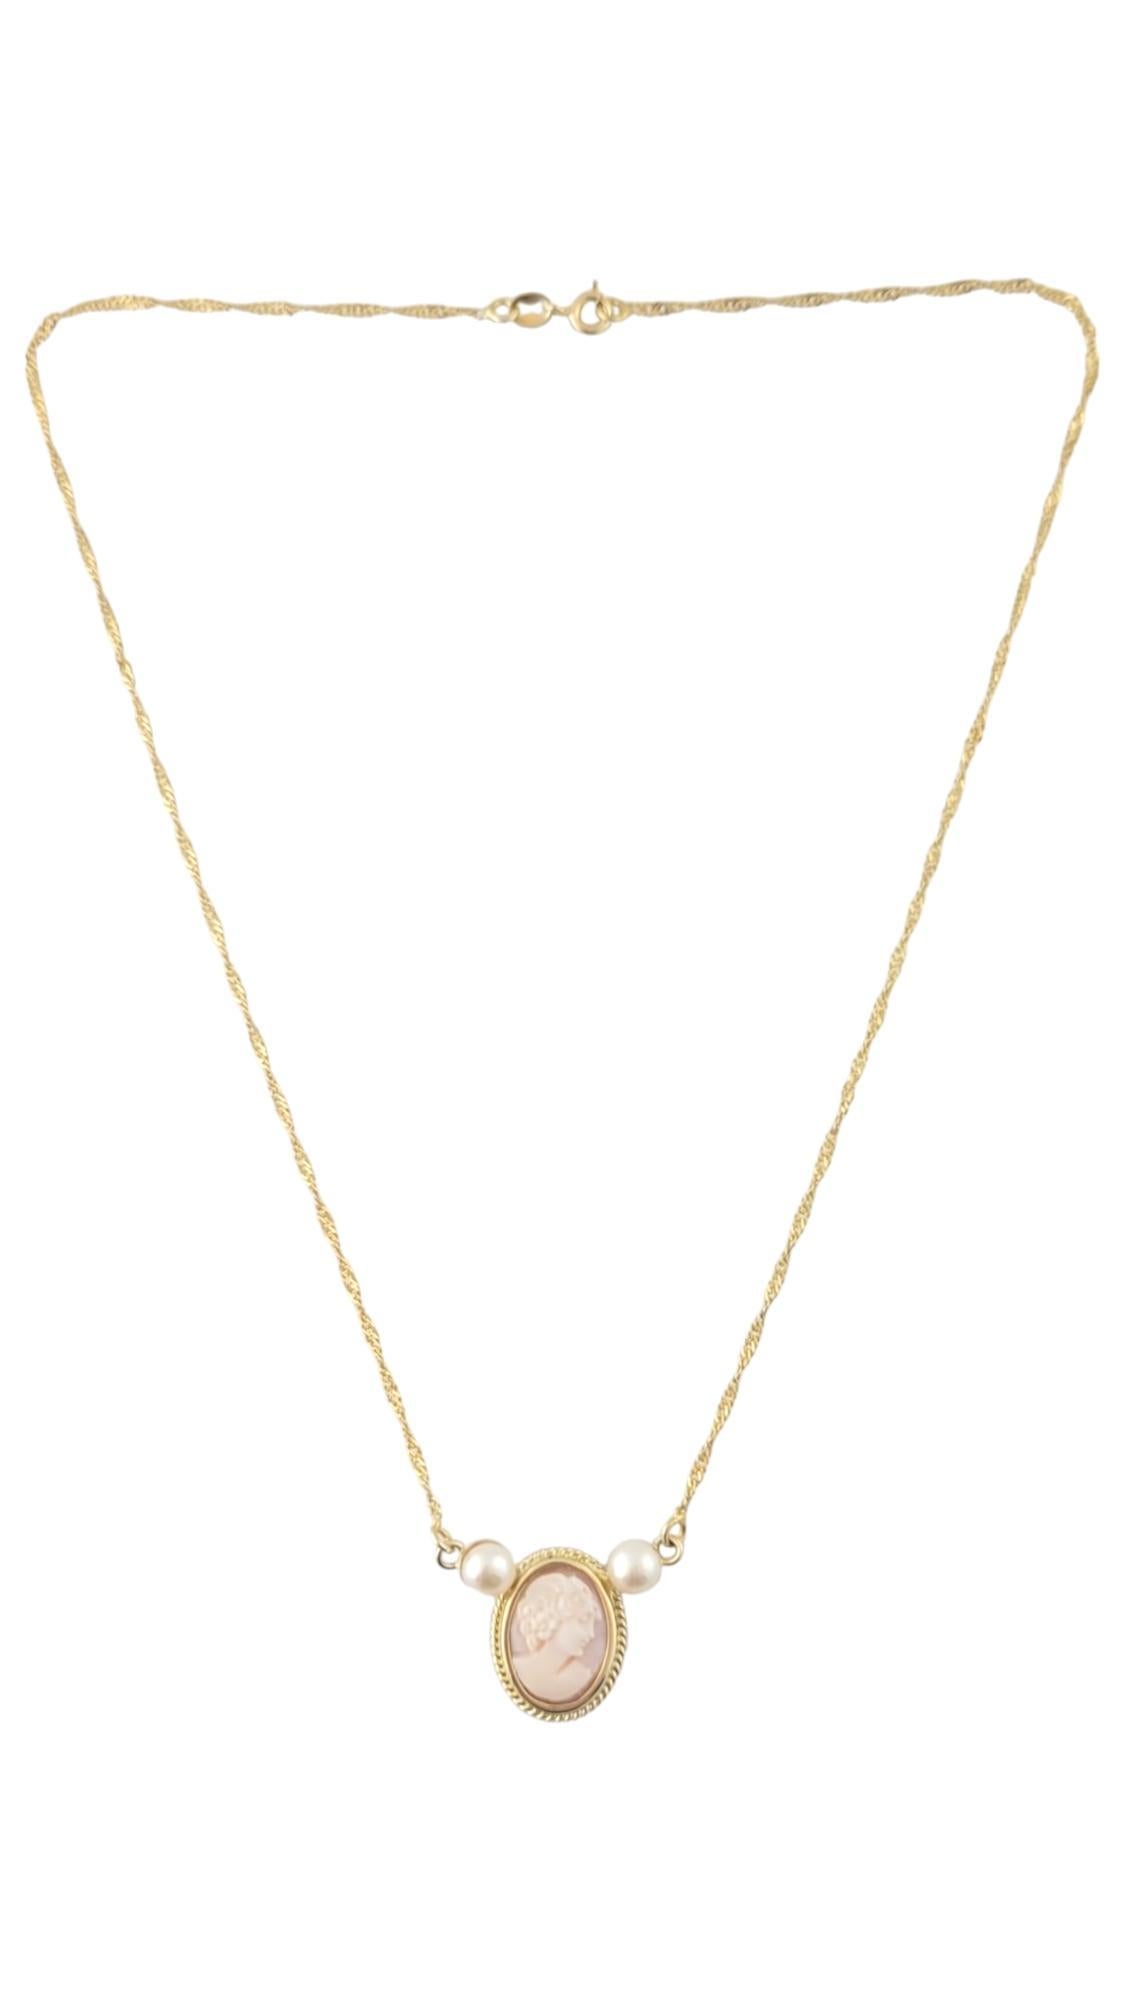 Vintage 14K Yellow Gold Cameo Necklace

This breath-taking cameo necklace has a beautiful twisted 14K gold chain that connects to a gorgeous cameo pendant with 2 stunning pearls all set in 14K yellow gold!

Pearls: 6.09mm each

Chain length: